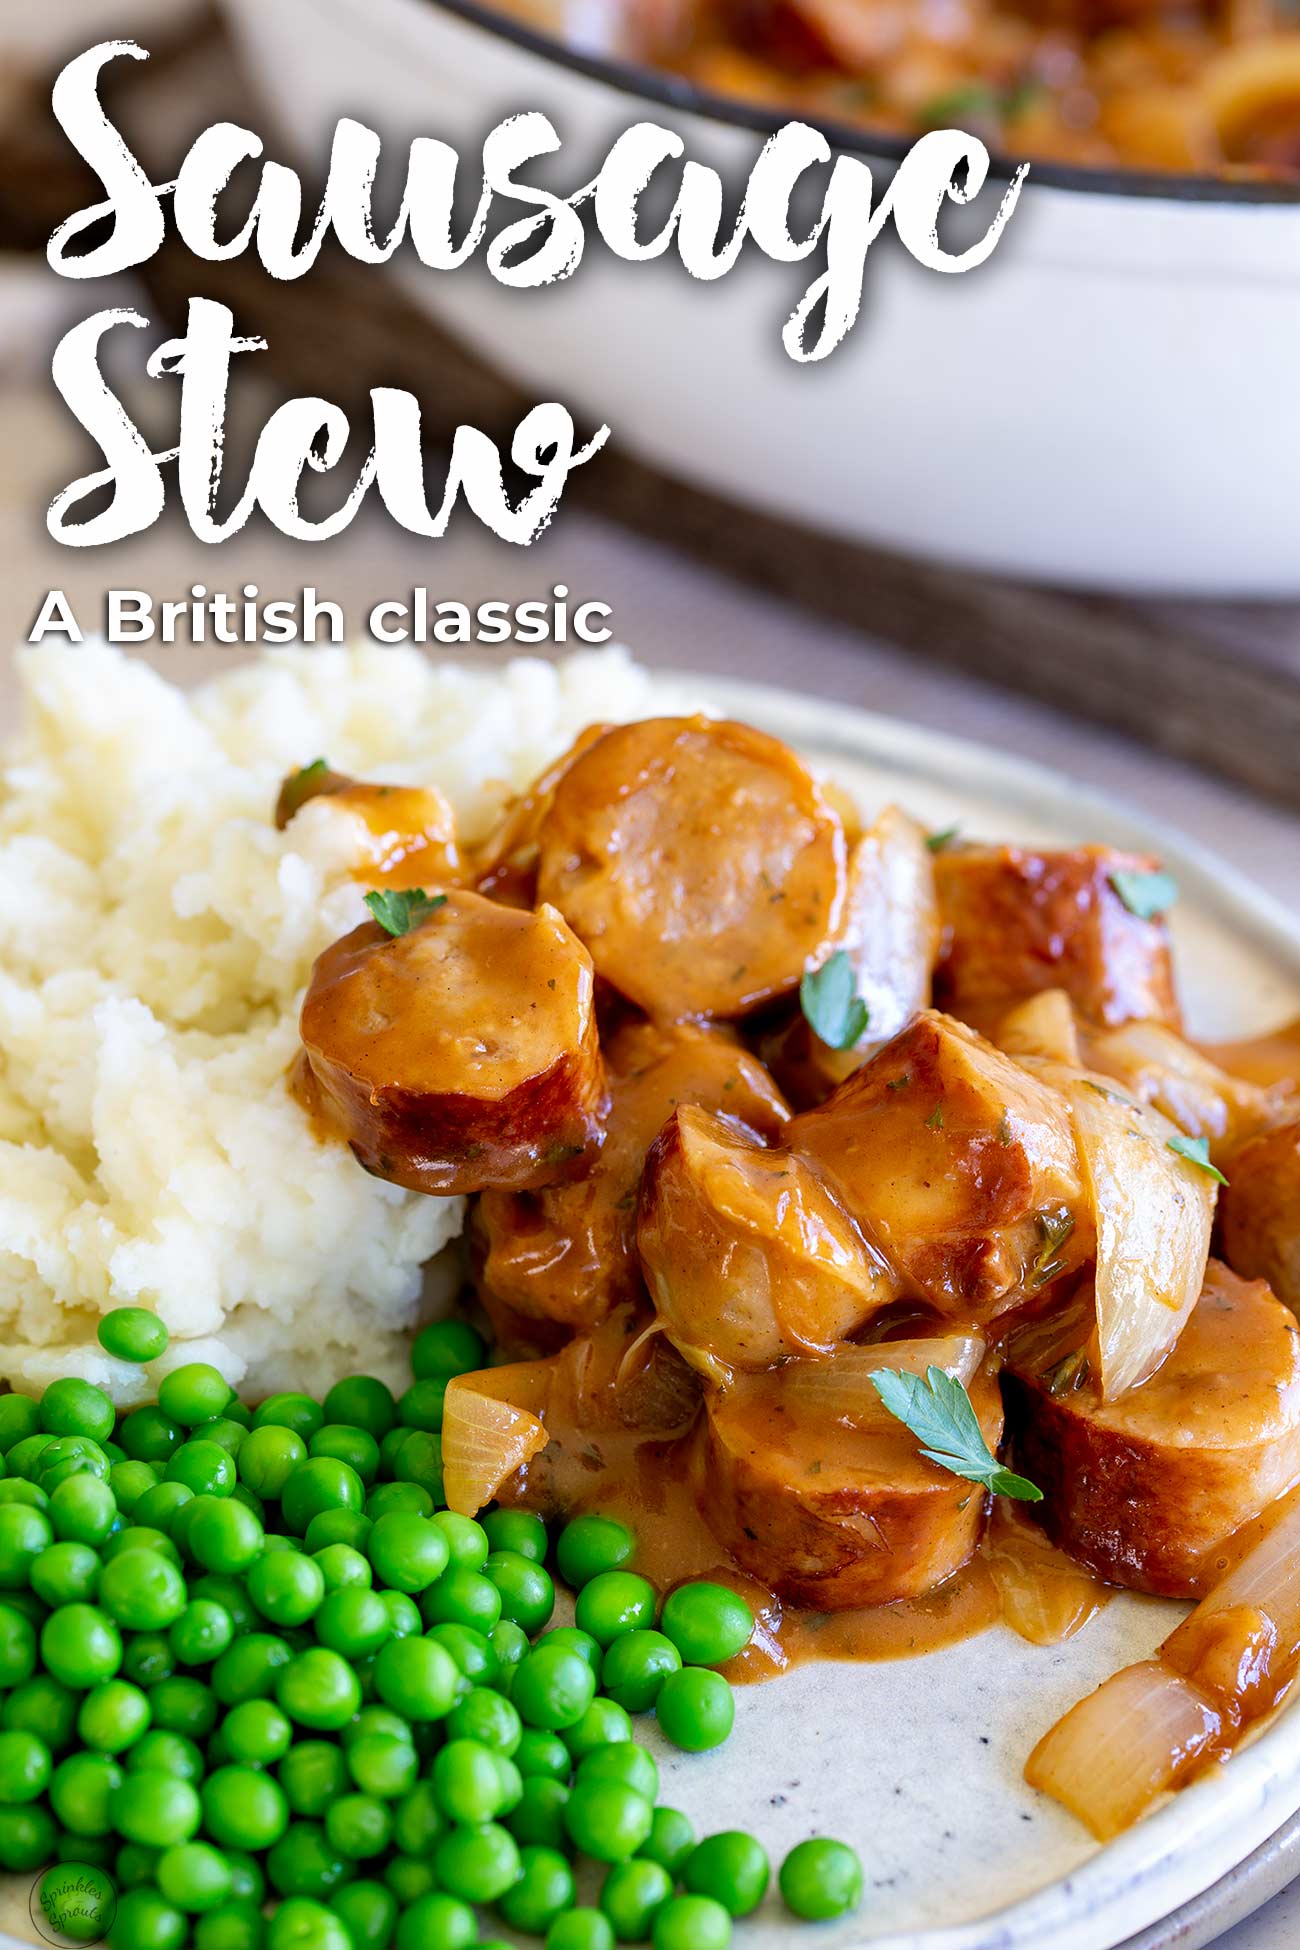 PINTEREST IMAGE: Sausage stew with text overlay